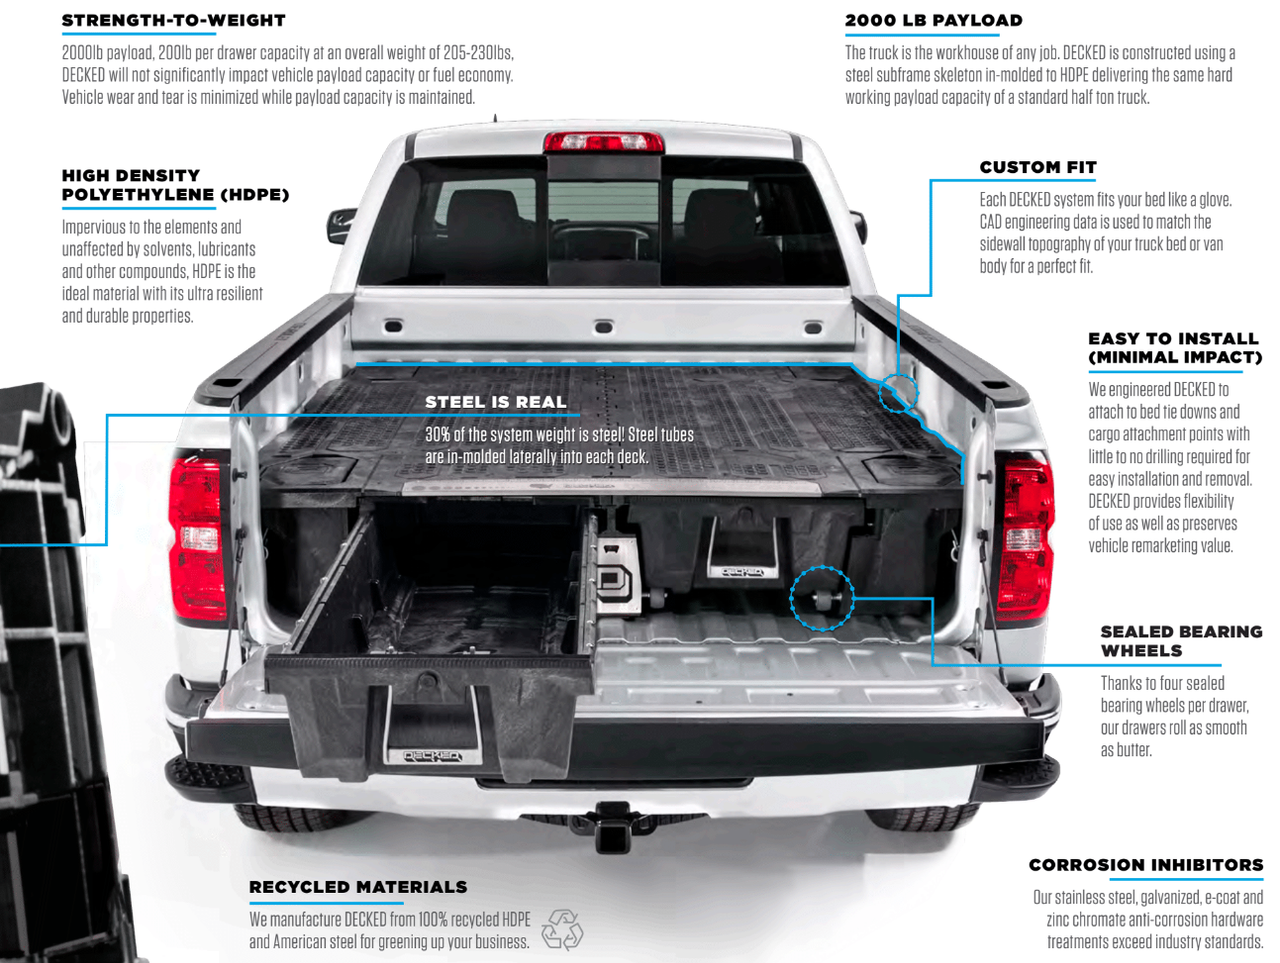 Decked Pickup Truck Weatherproof Storage System with 2 Sliding Drawers,  FULL-SIZE, 2000 lb payload, easy